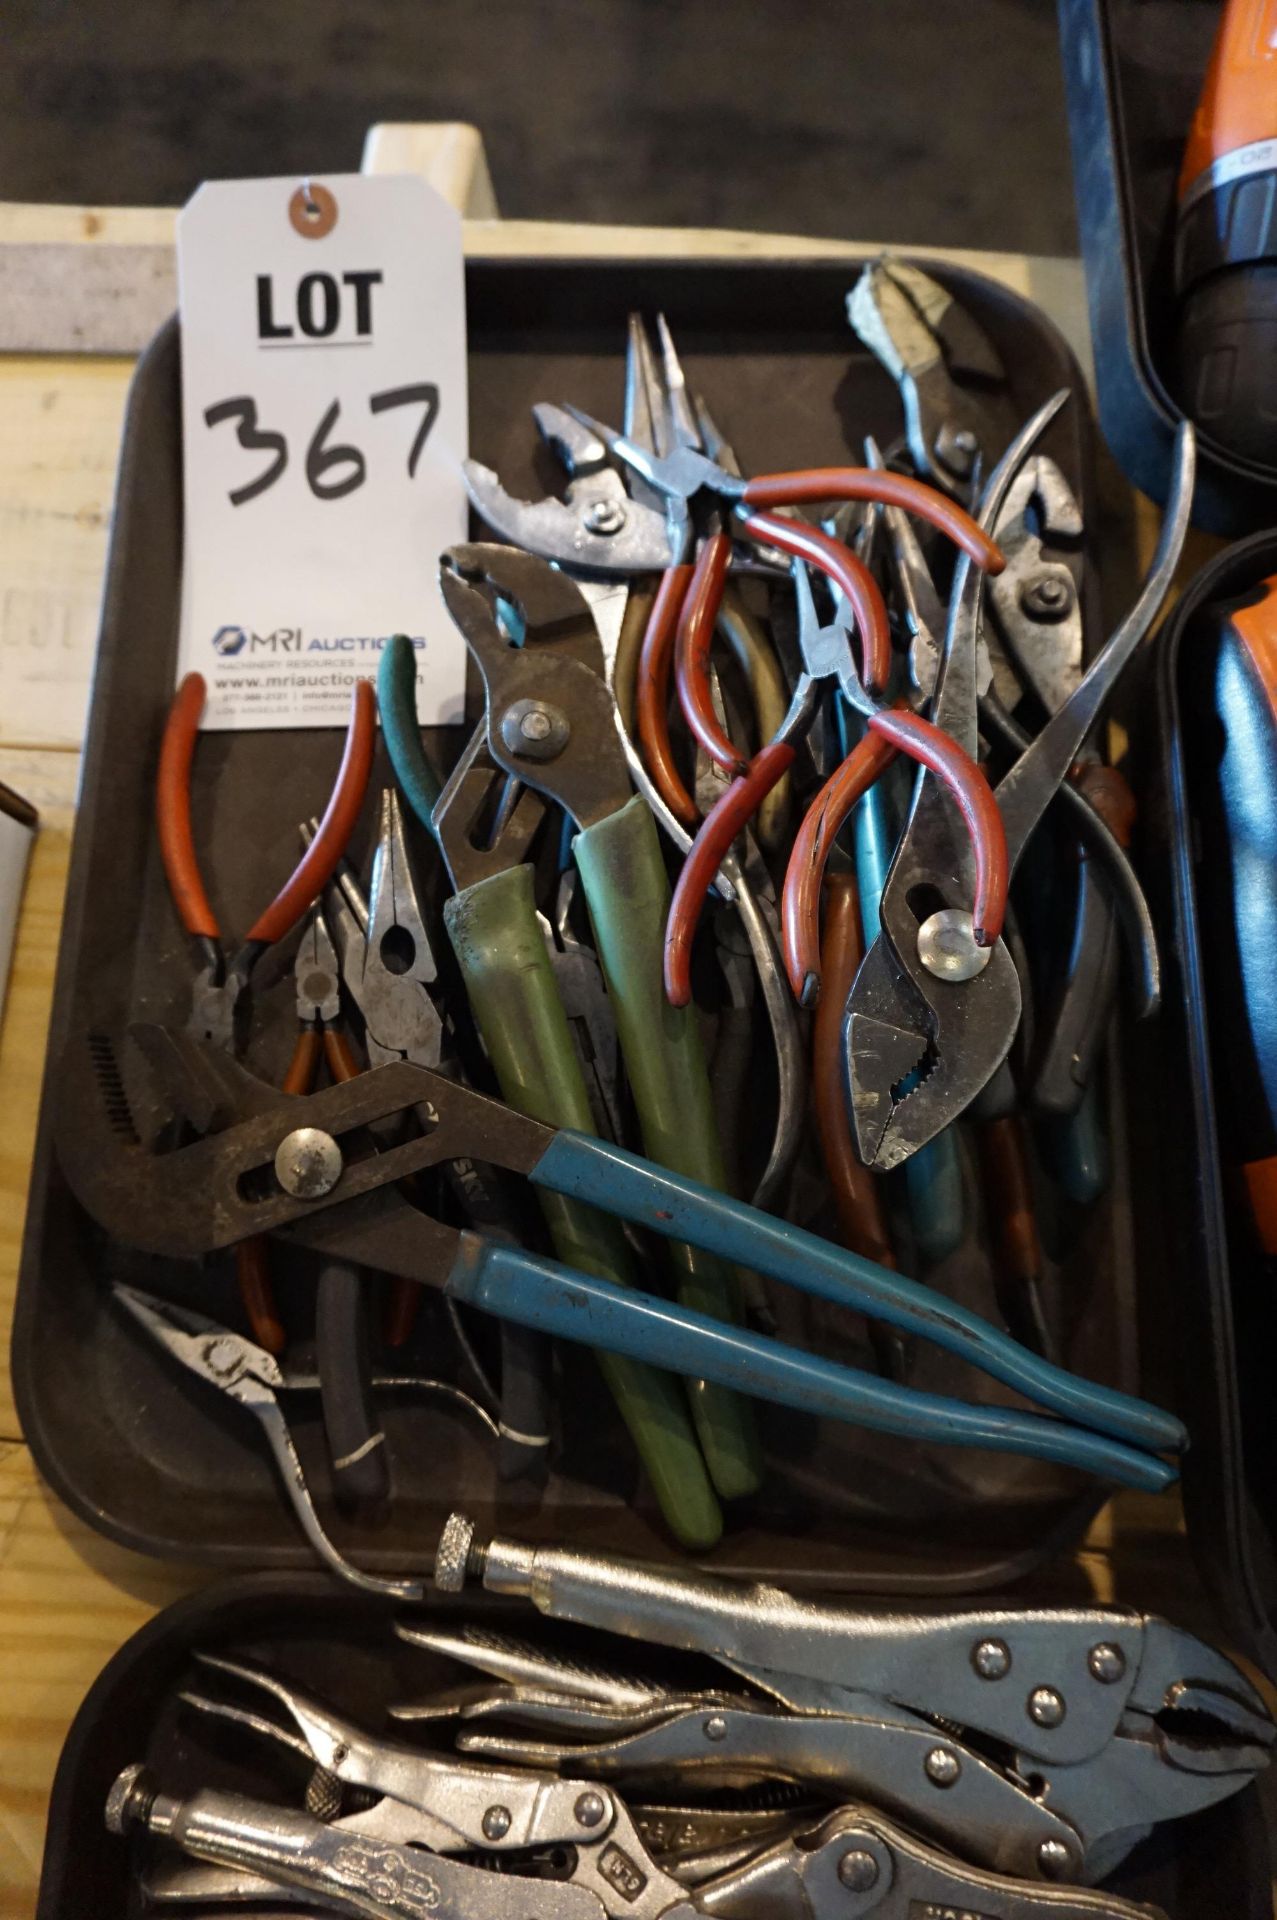 MISC. CHANNELLOCKS, CLAMPS, SNIPS, CRIMPERS, PLIERS - Image 3 of 3